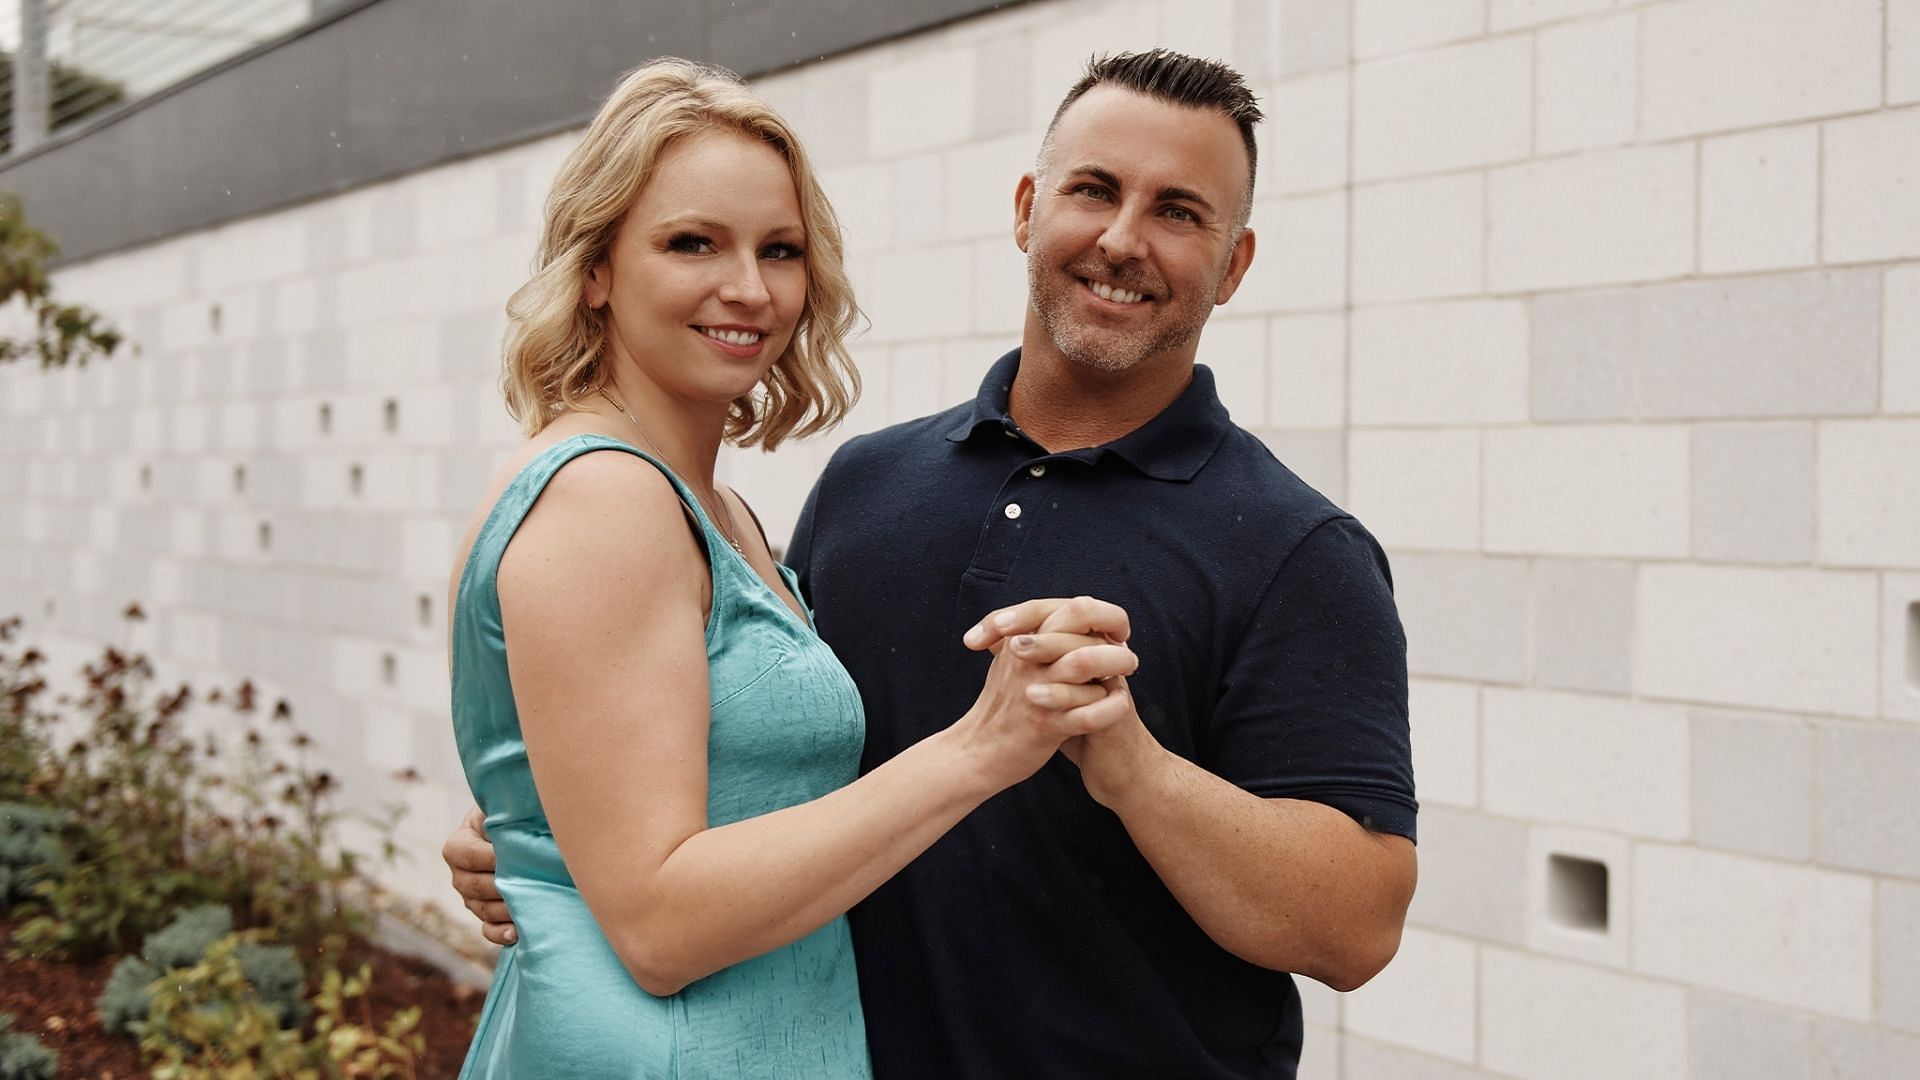 Lindsey addresses intimacy issues with Mark on Married At First Sight (Image via Lifetime)